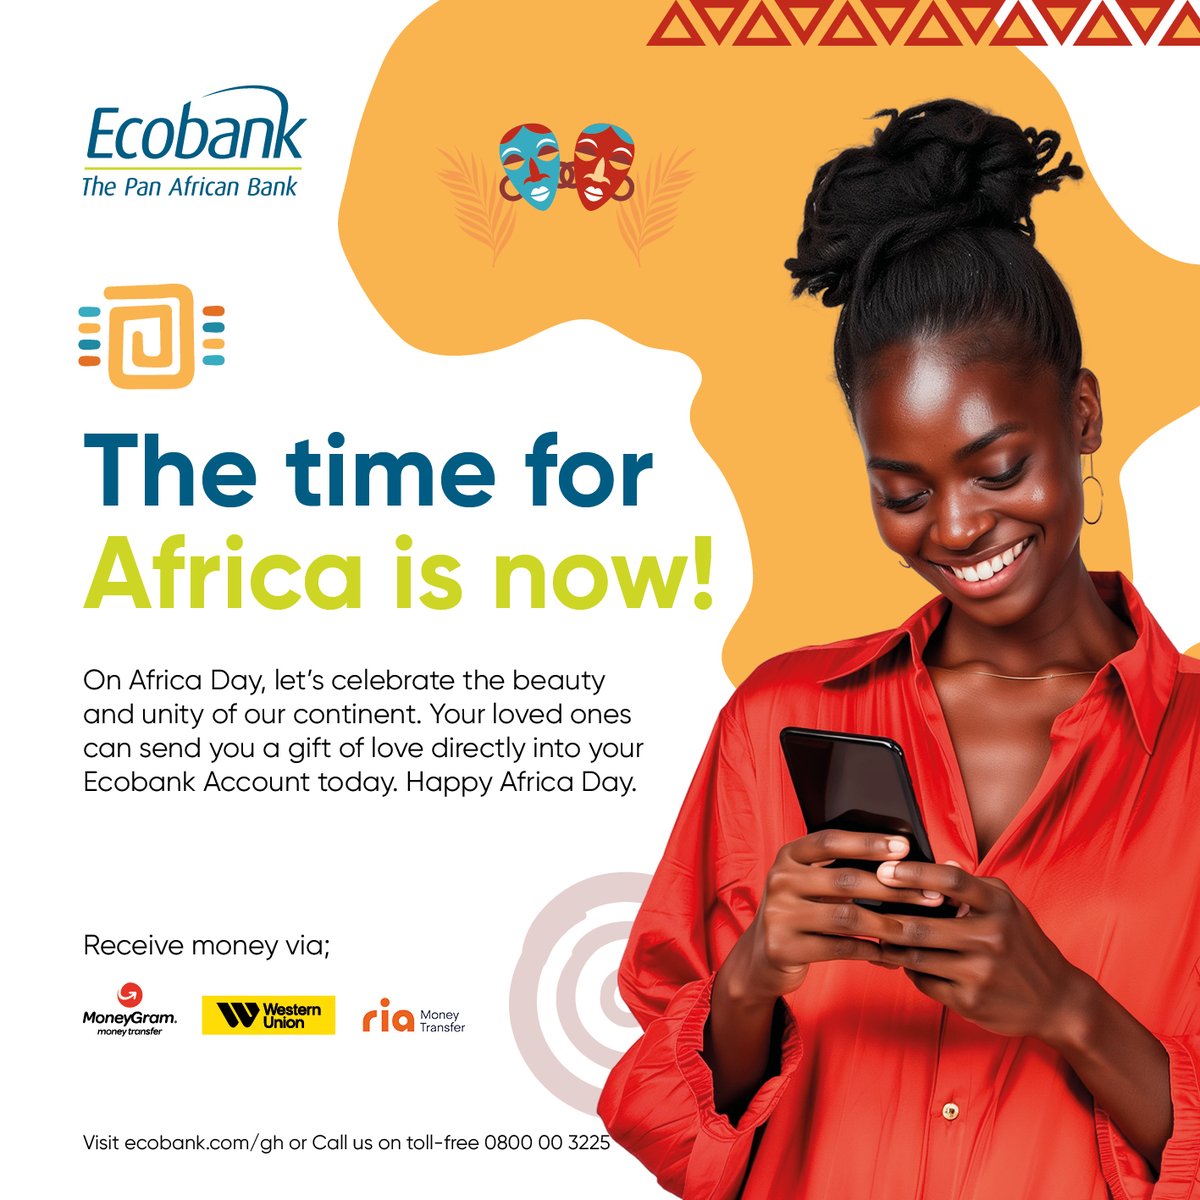 Happy Africa Day! Let's honour our continent's vibrant beauty and profound unity. Today, we come together to embrace our shared heritage and bright future.

|A BETTER WAY, A BETTER AFRICA|

#Ecobank
#ThePanAfricanBank
#ABetterWay